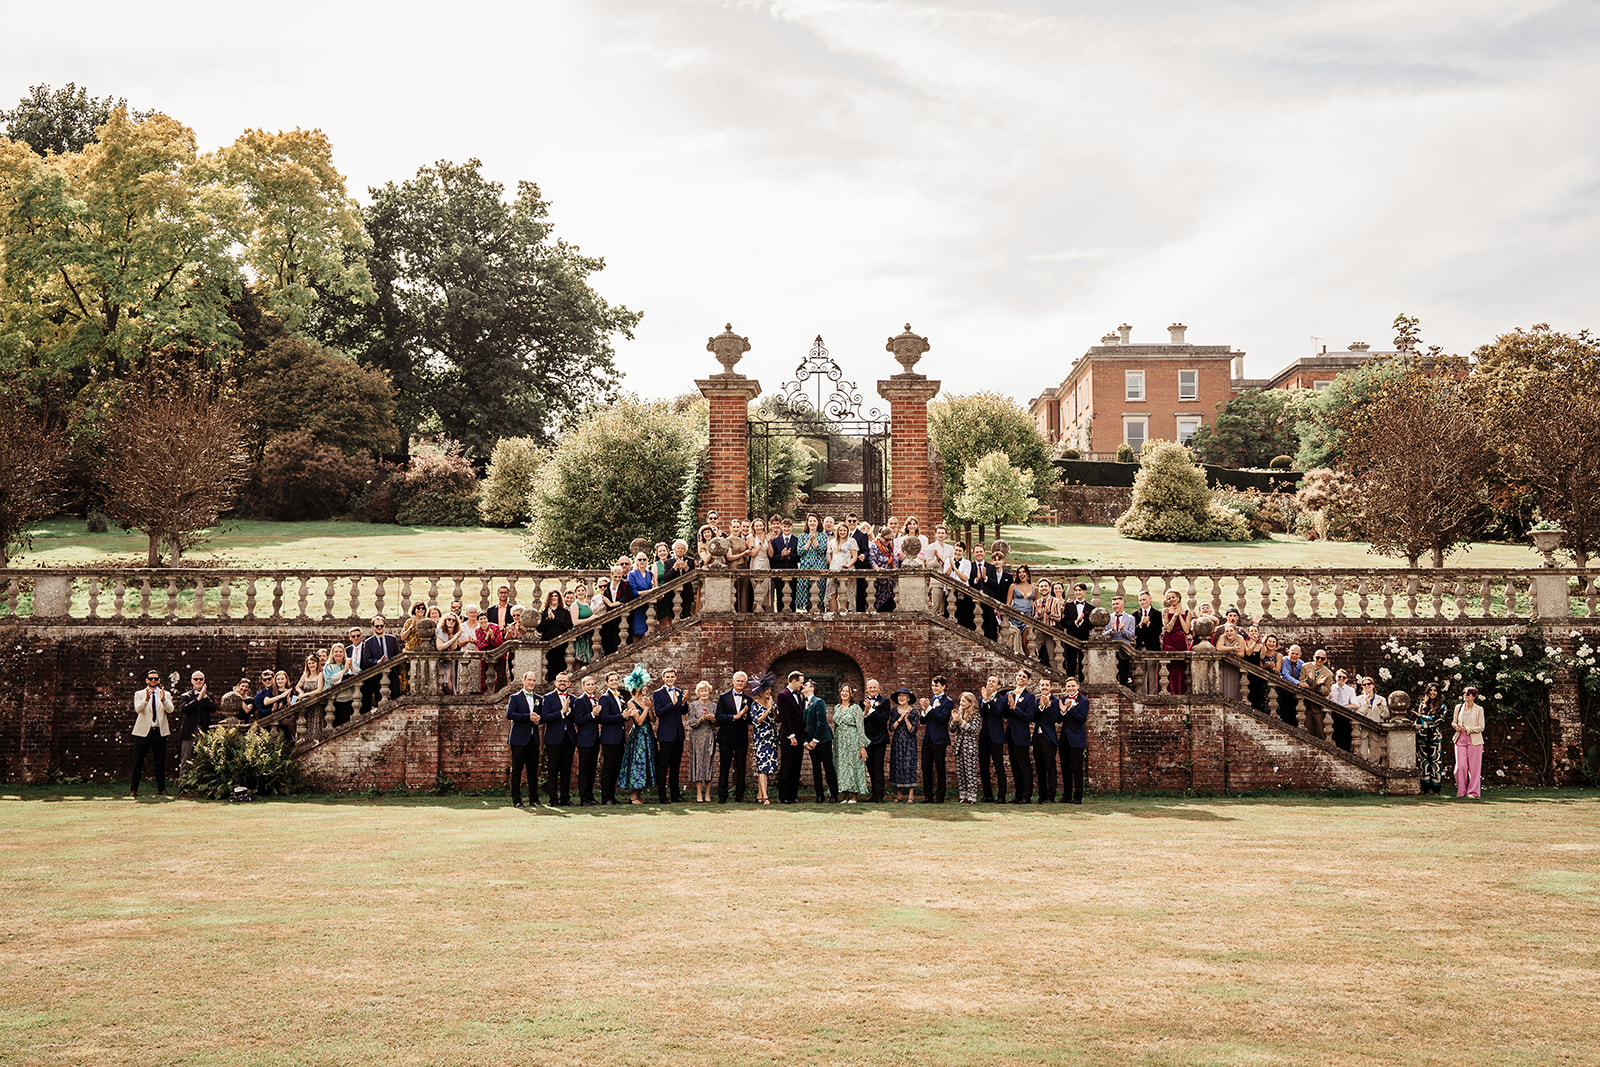 Large wedding party photo on steps at Mount Ephraim Country House & Gardens